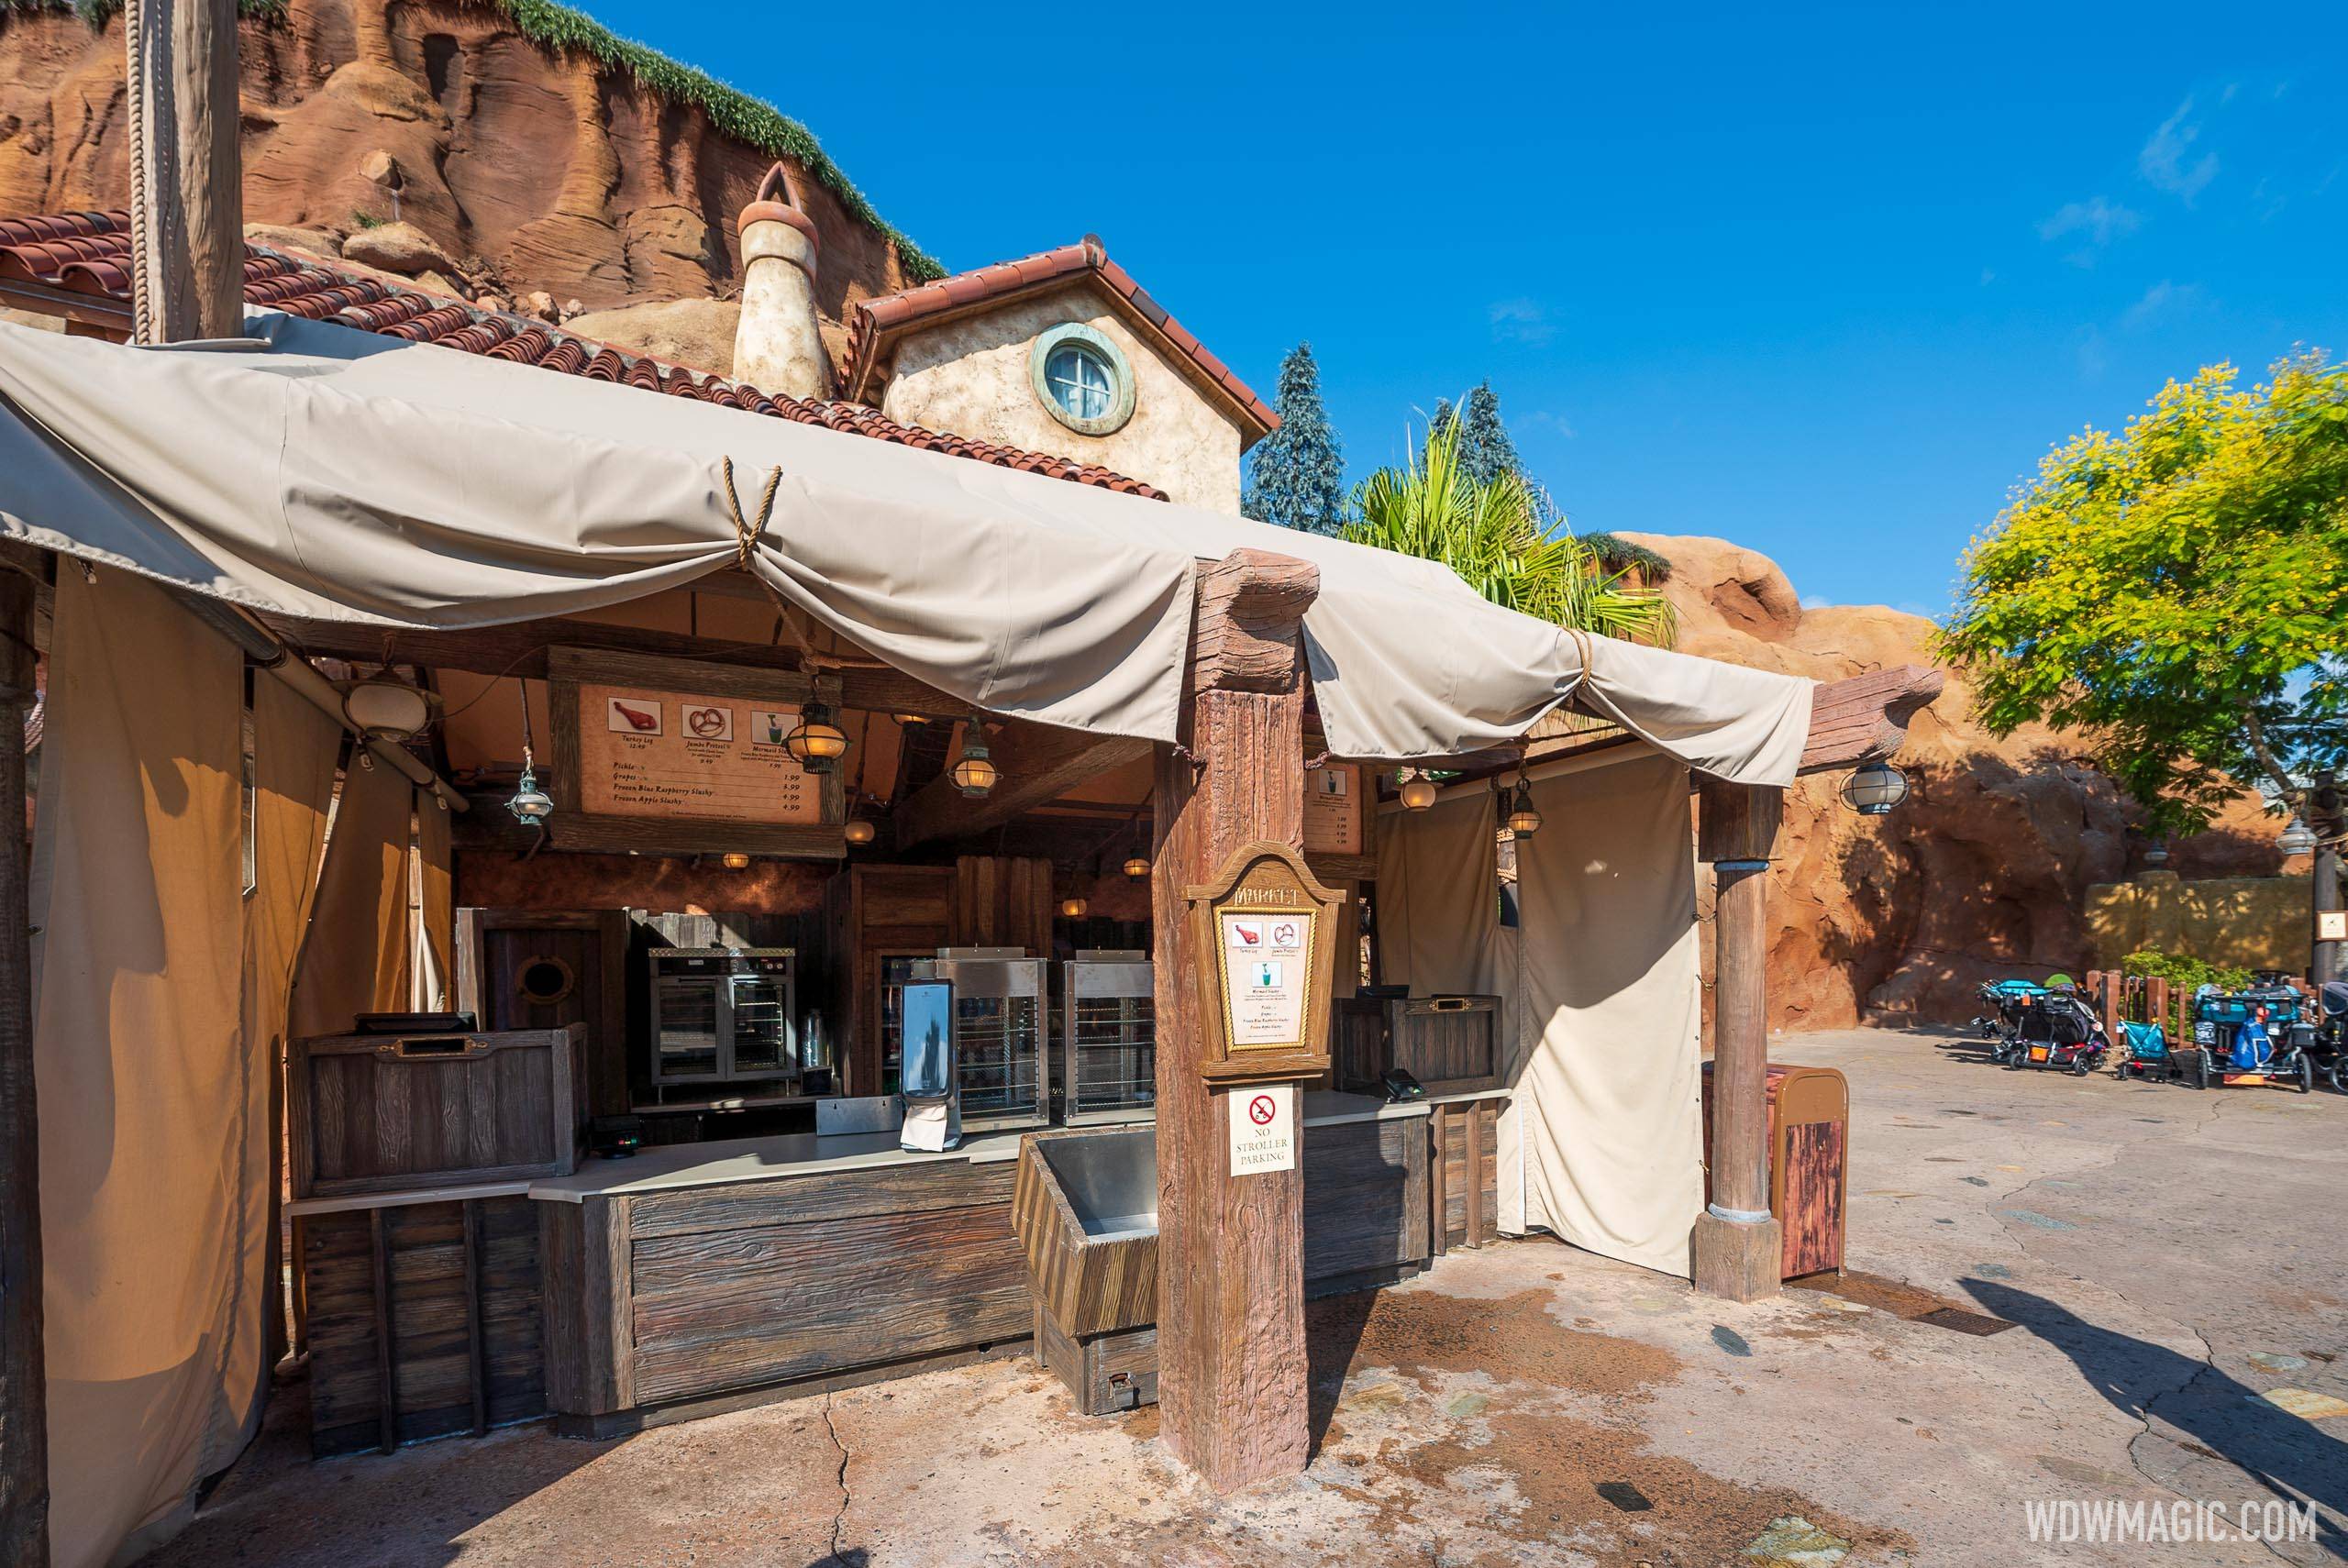 Prince Eric's Village Cafe reopening July 26 2021